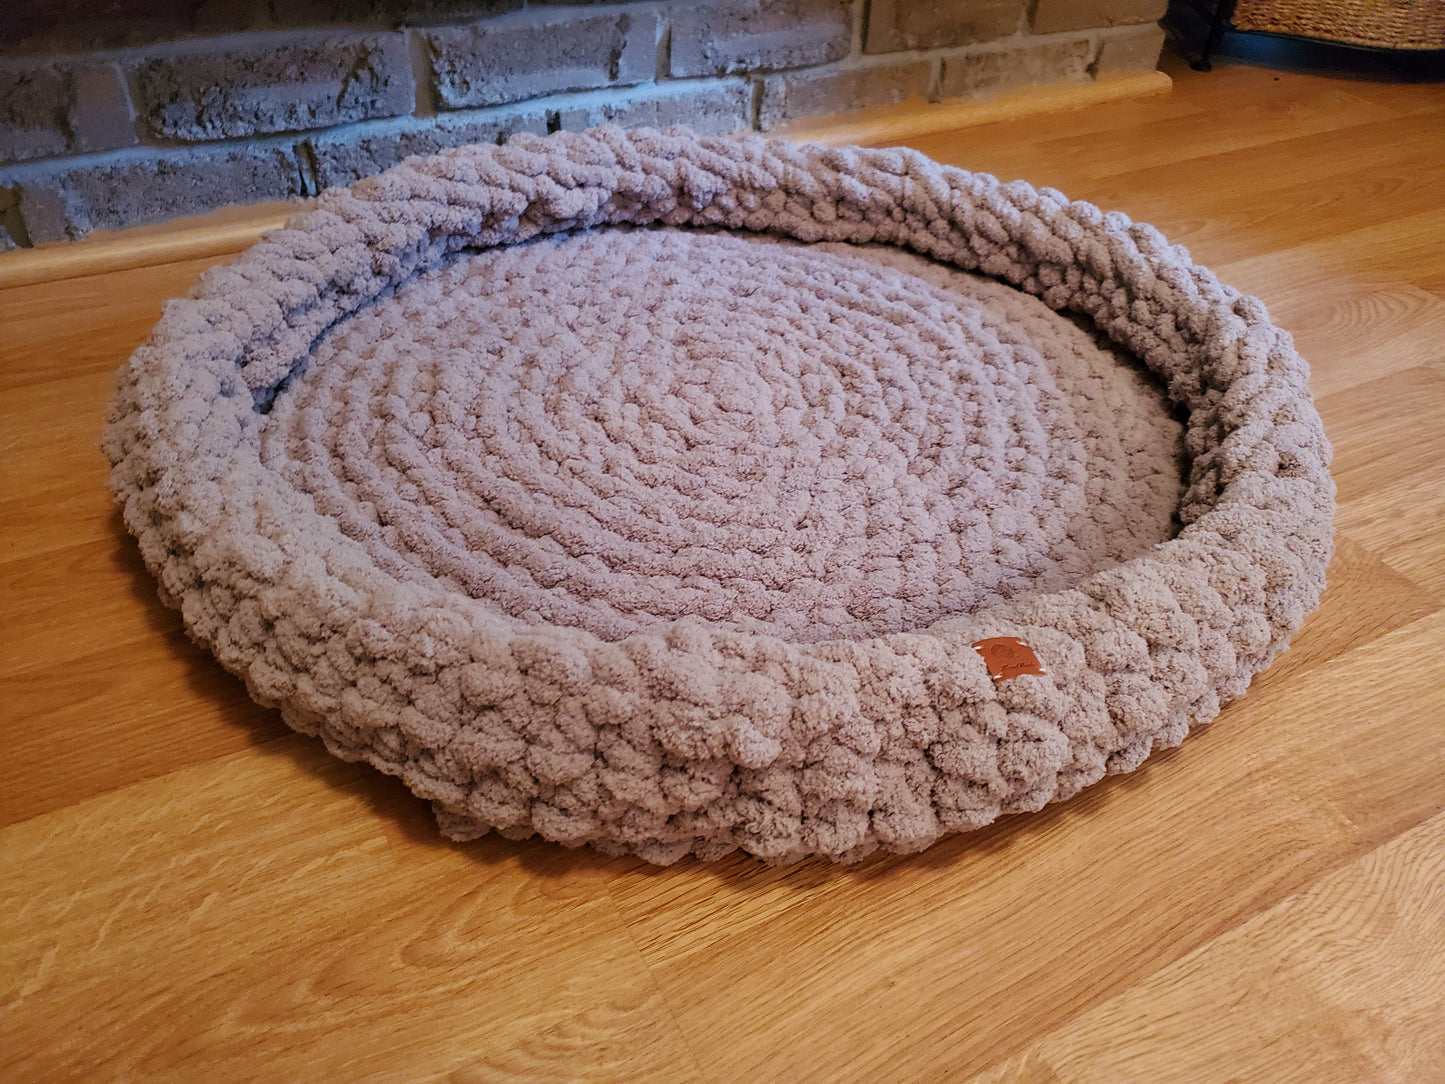 36" Donut Bed